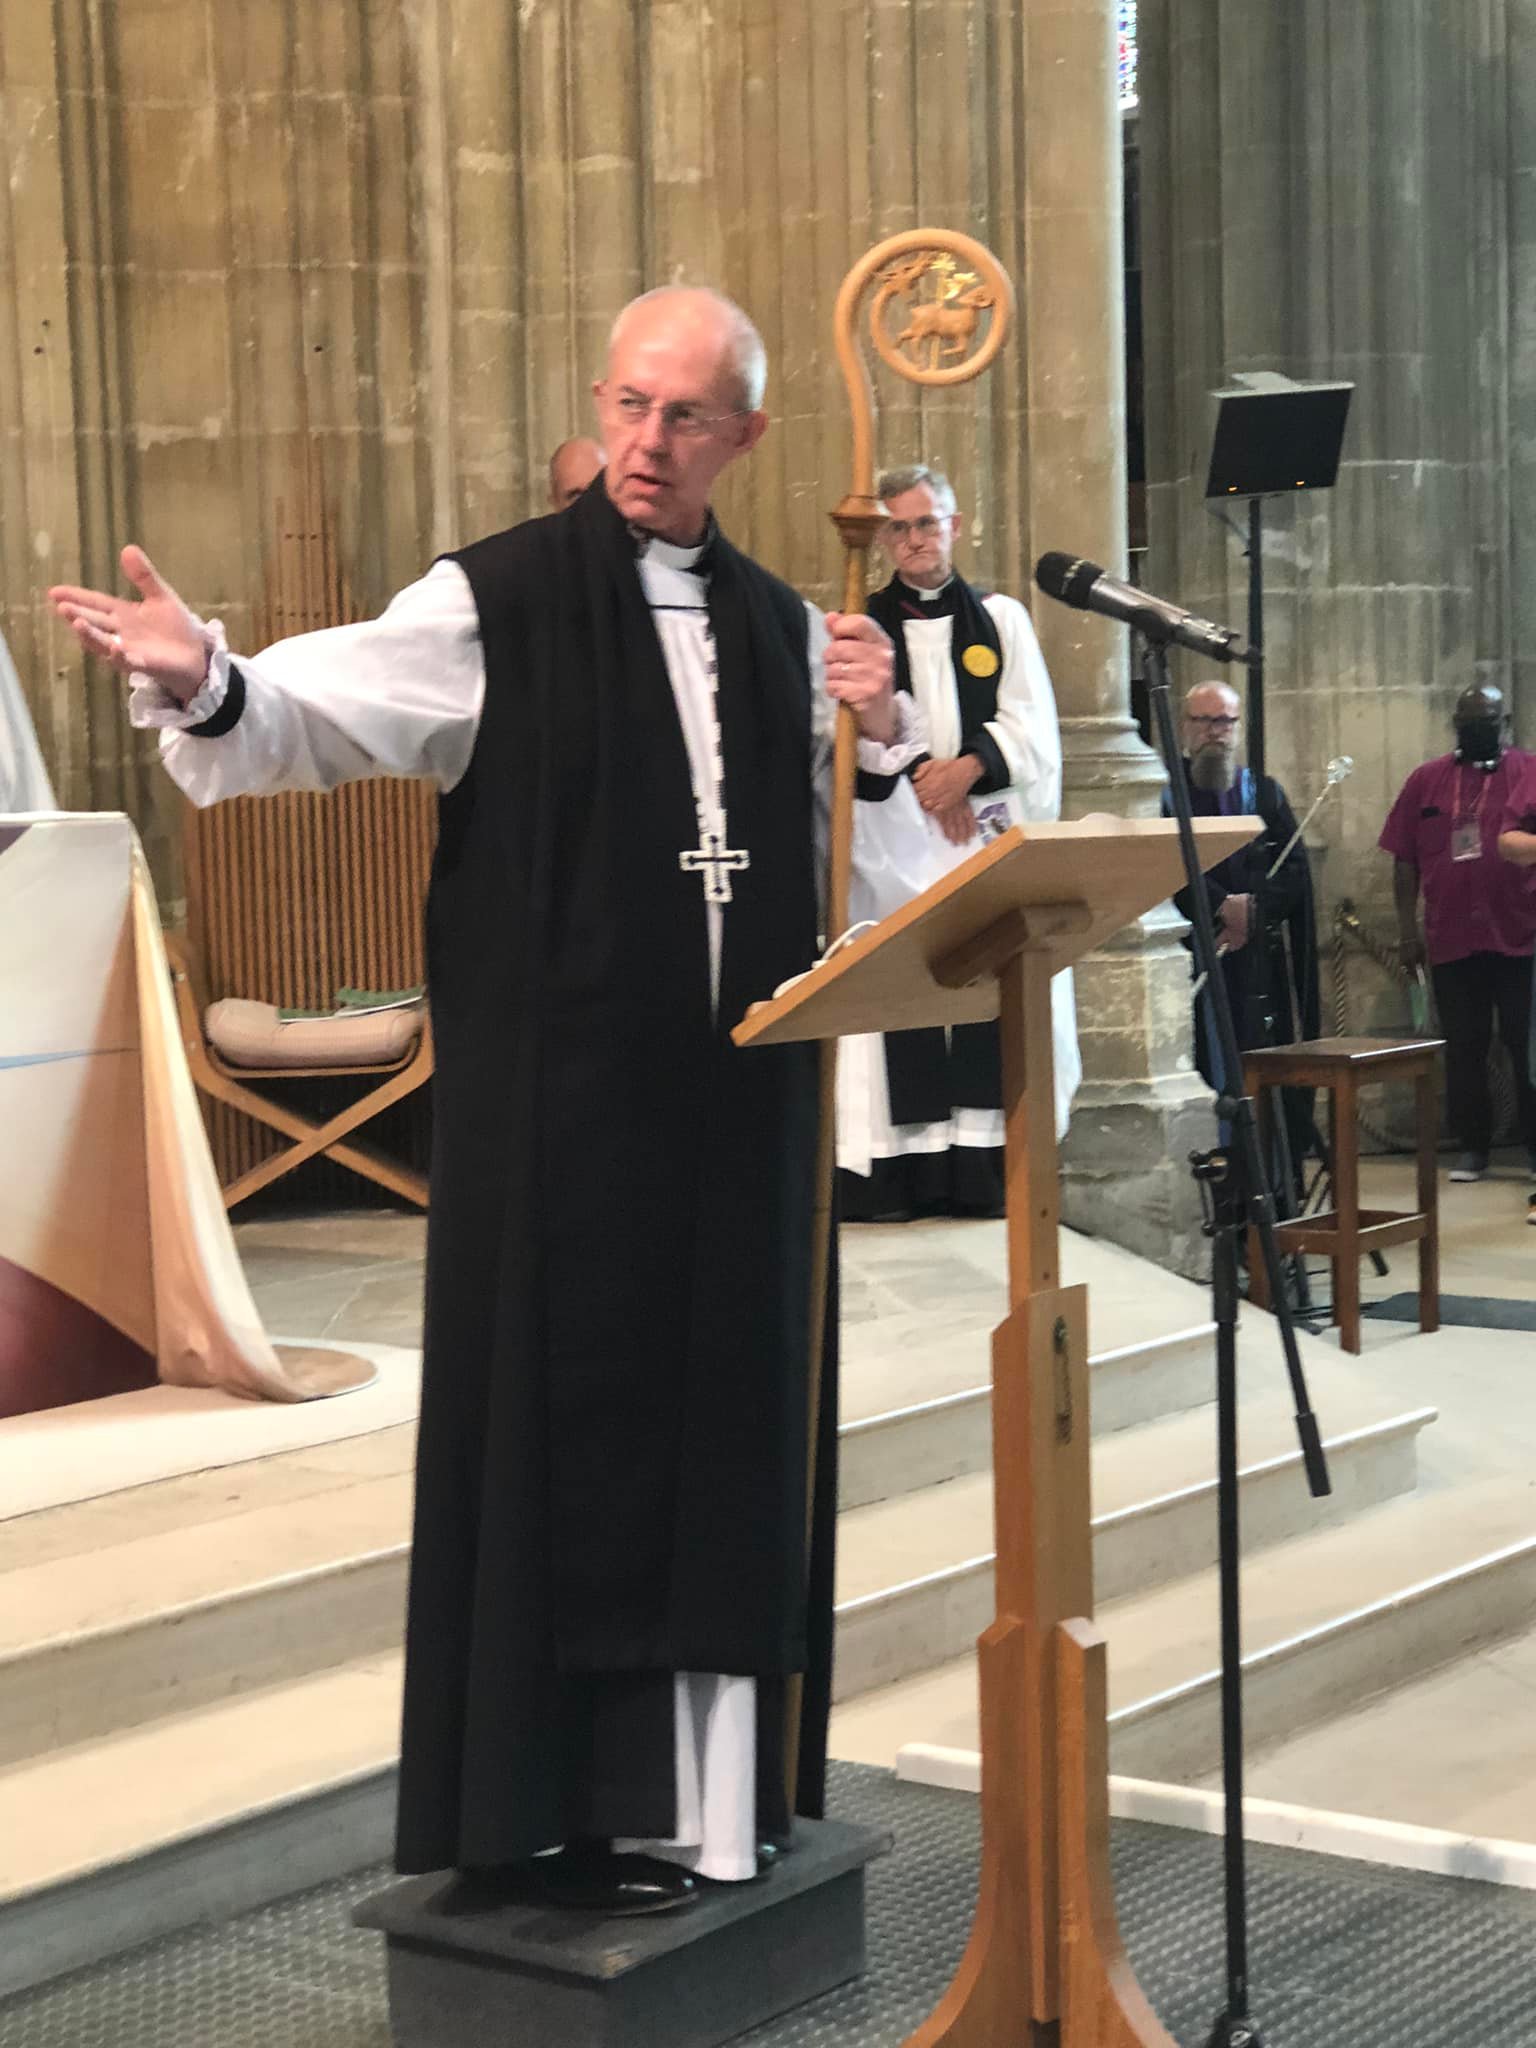 The Archbishop of Canterbury at the end of choral evensong at our retreat. The crozier was a gift from Pope Francis and is a replica of the crozier carried by St. Augustine of Canterbury in 597.